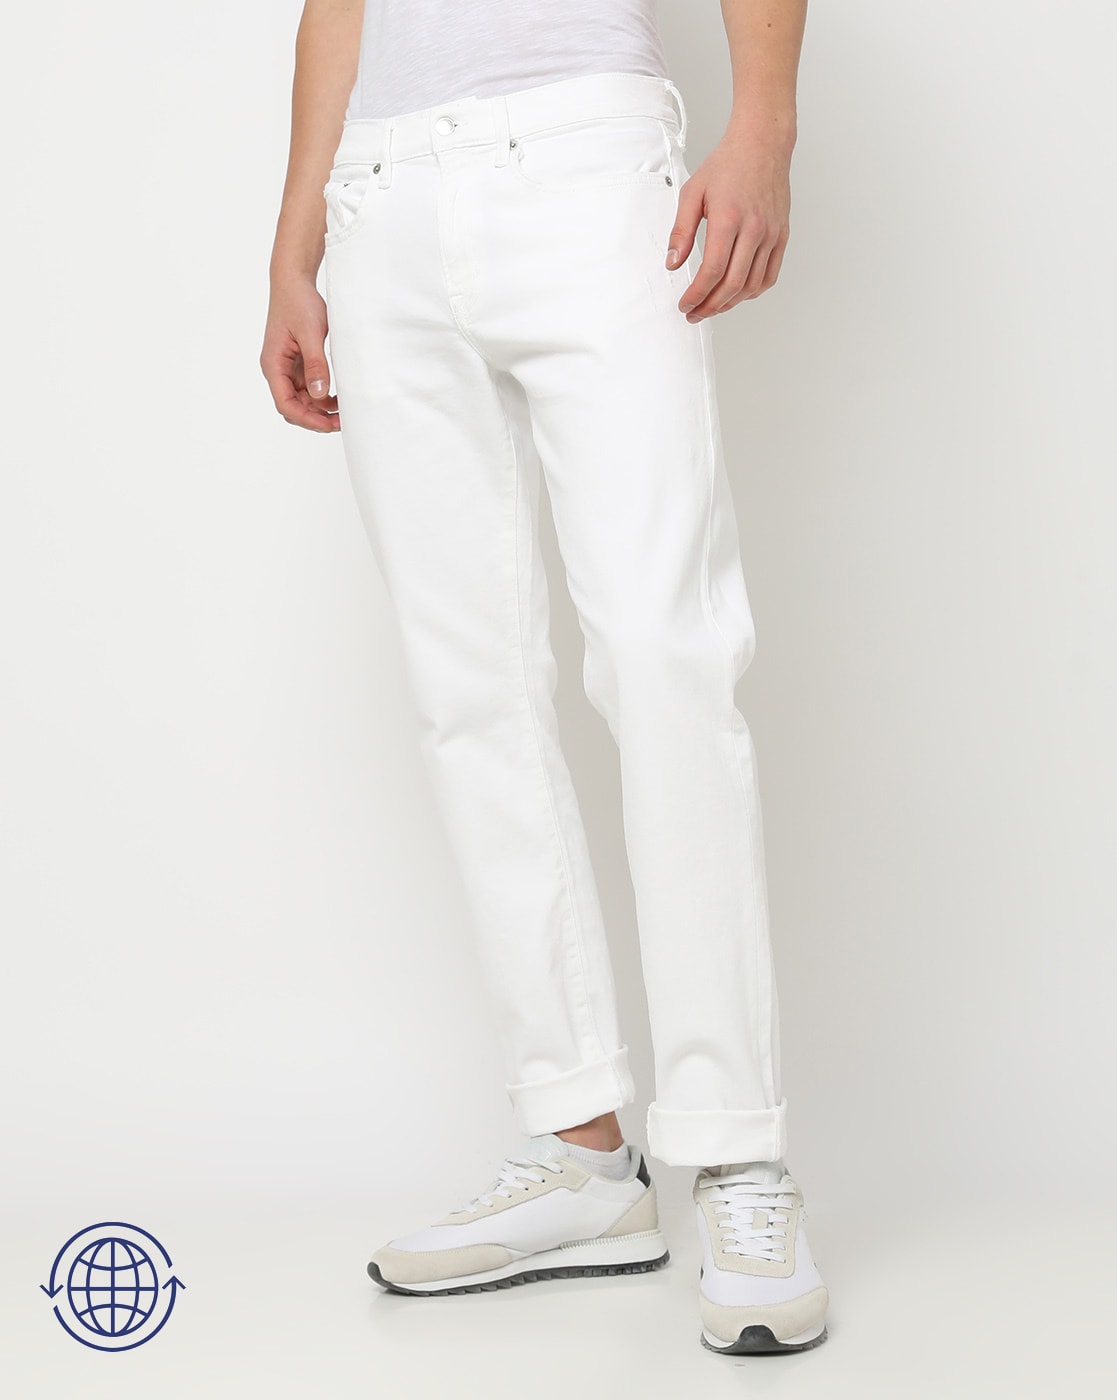 What To Wear With White Jeans - Men's Outfits & Style Tips